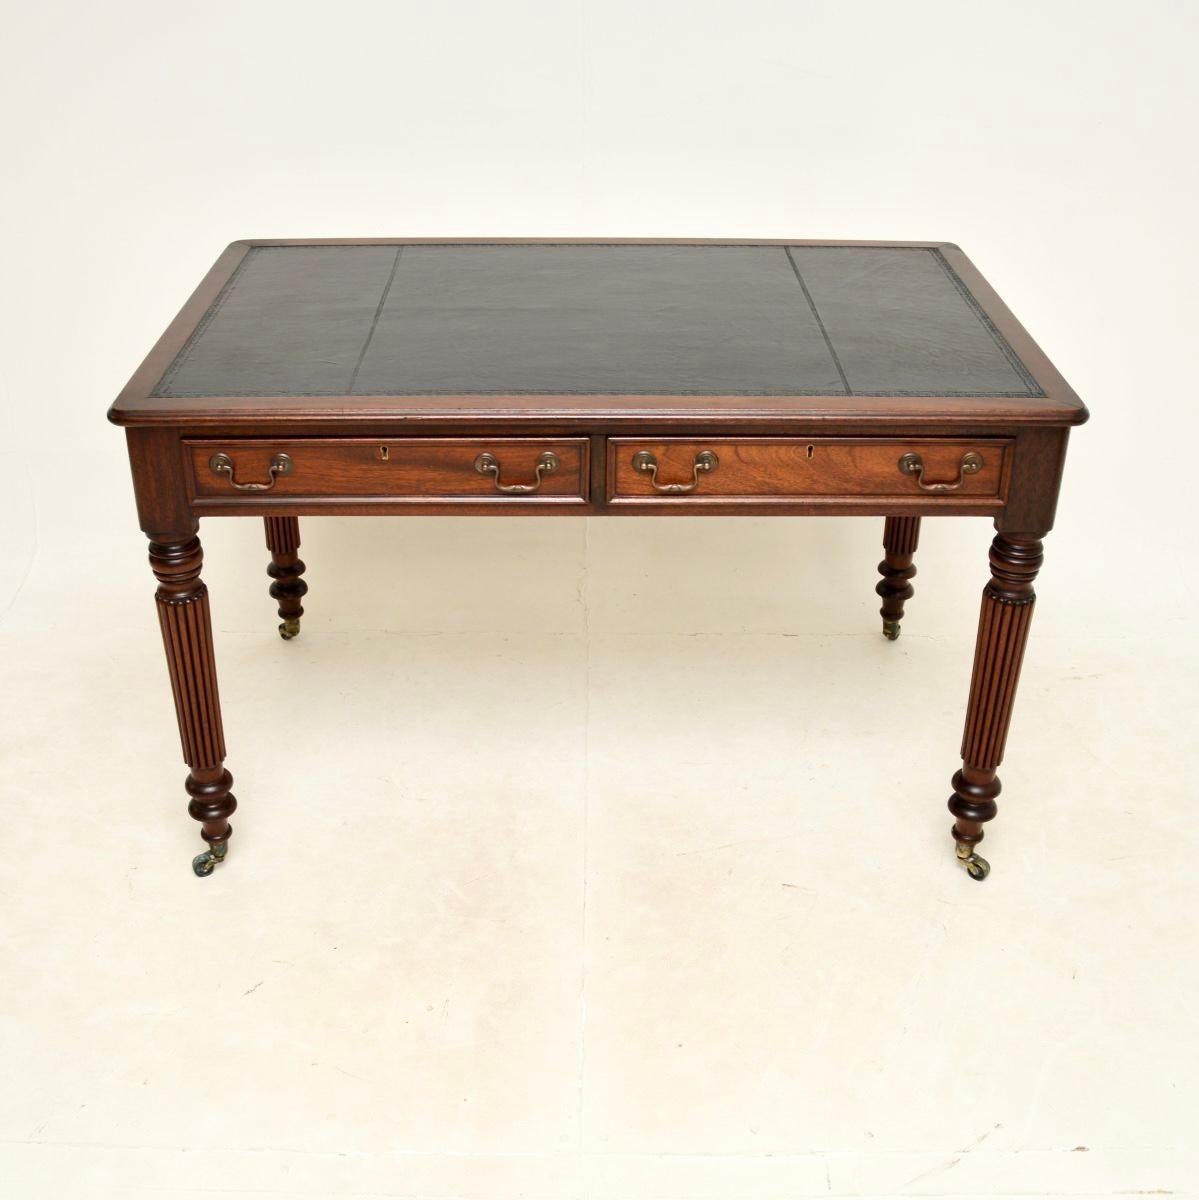 A fantastic antique leather top writing table / desk. This was made in England, it dates from around the 1930-50’s.

The quality is outstanding, it stands on boldly turned and fluted legs with brass casters, it has a gorgeous inset faded black